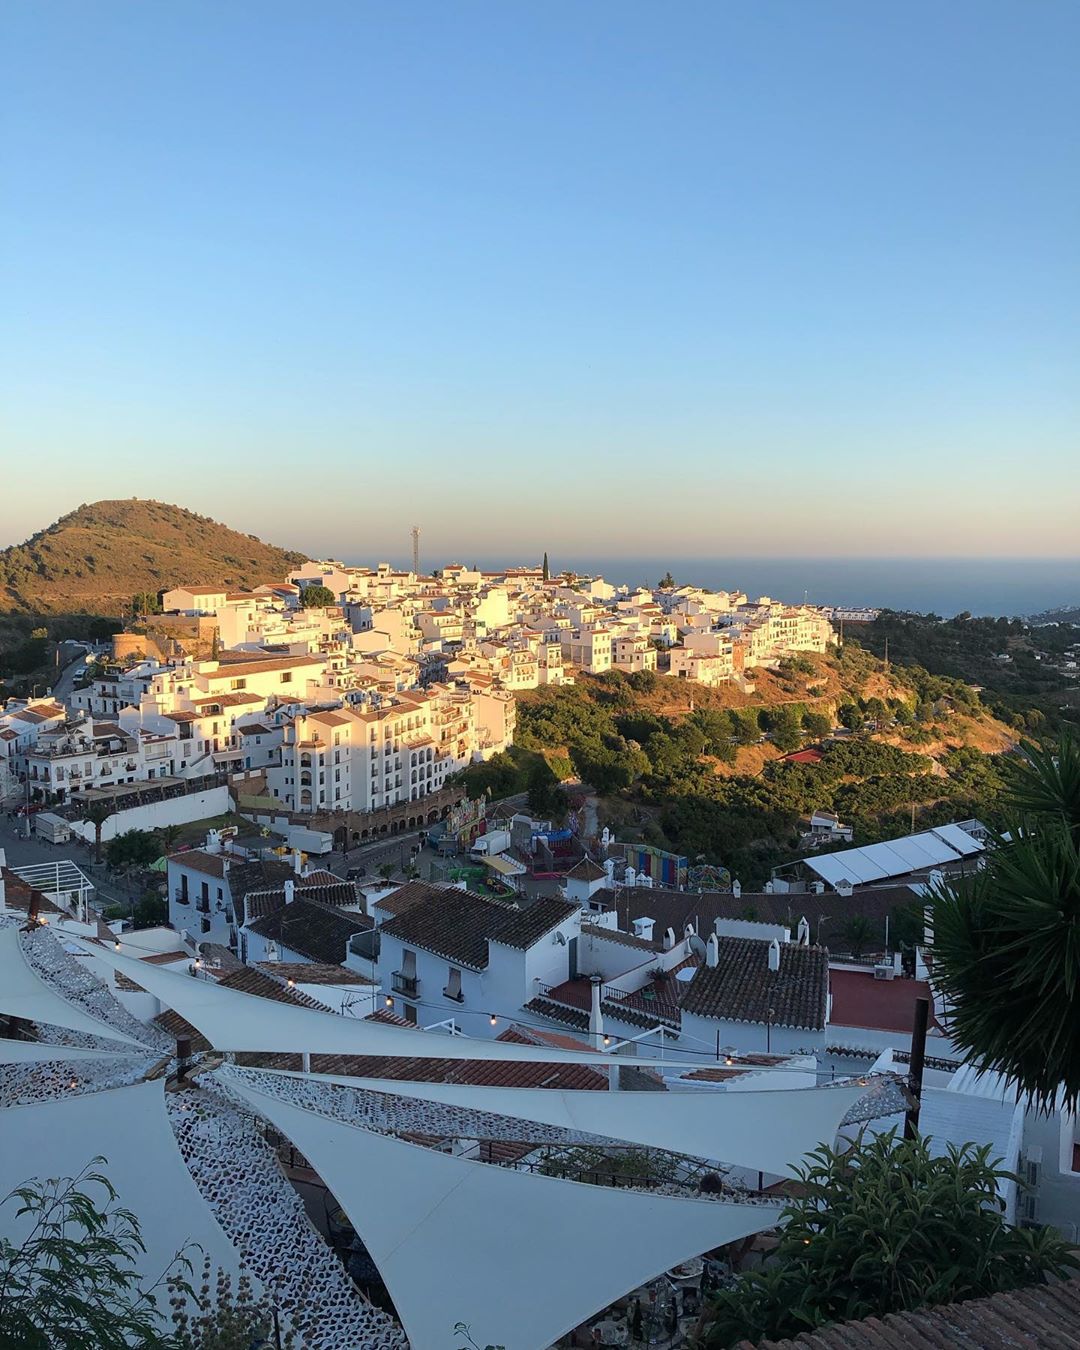 #FoxPRTips | “When ambling around Andalusia, make sure to visit the quaint hillside town of Frigiliana. Located at the base of the Sierra Nevada, approximately 1.5 hours from Marbella, the tiny cobbled streets and beautiful rooftop bars make this the perfect place to spend an afternoon/evening. For a delicious dinner with a view, make sure to finish off the evening at the delightful @thegardenfrigiliana” recommends Account Manager, @callummcla 
#foxprtravel #andalusia #frigiliana #sierranevada #spain